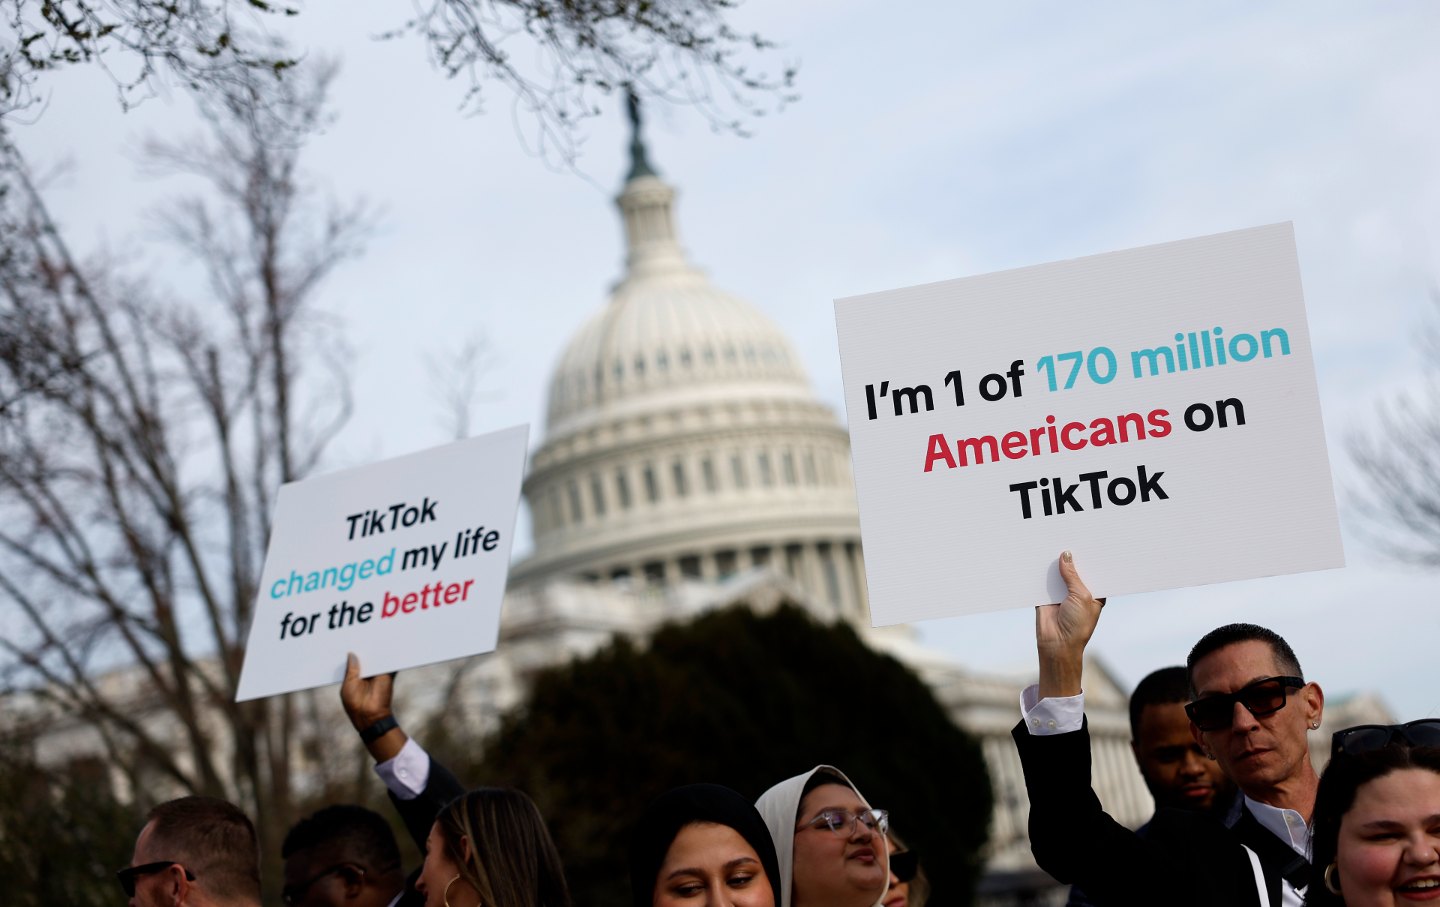 Proesters in front of the Capitol with signs protesting the bill to force the sale of TikTok to an American-owned company. Signs read 